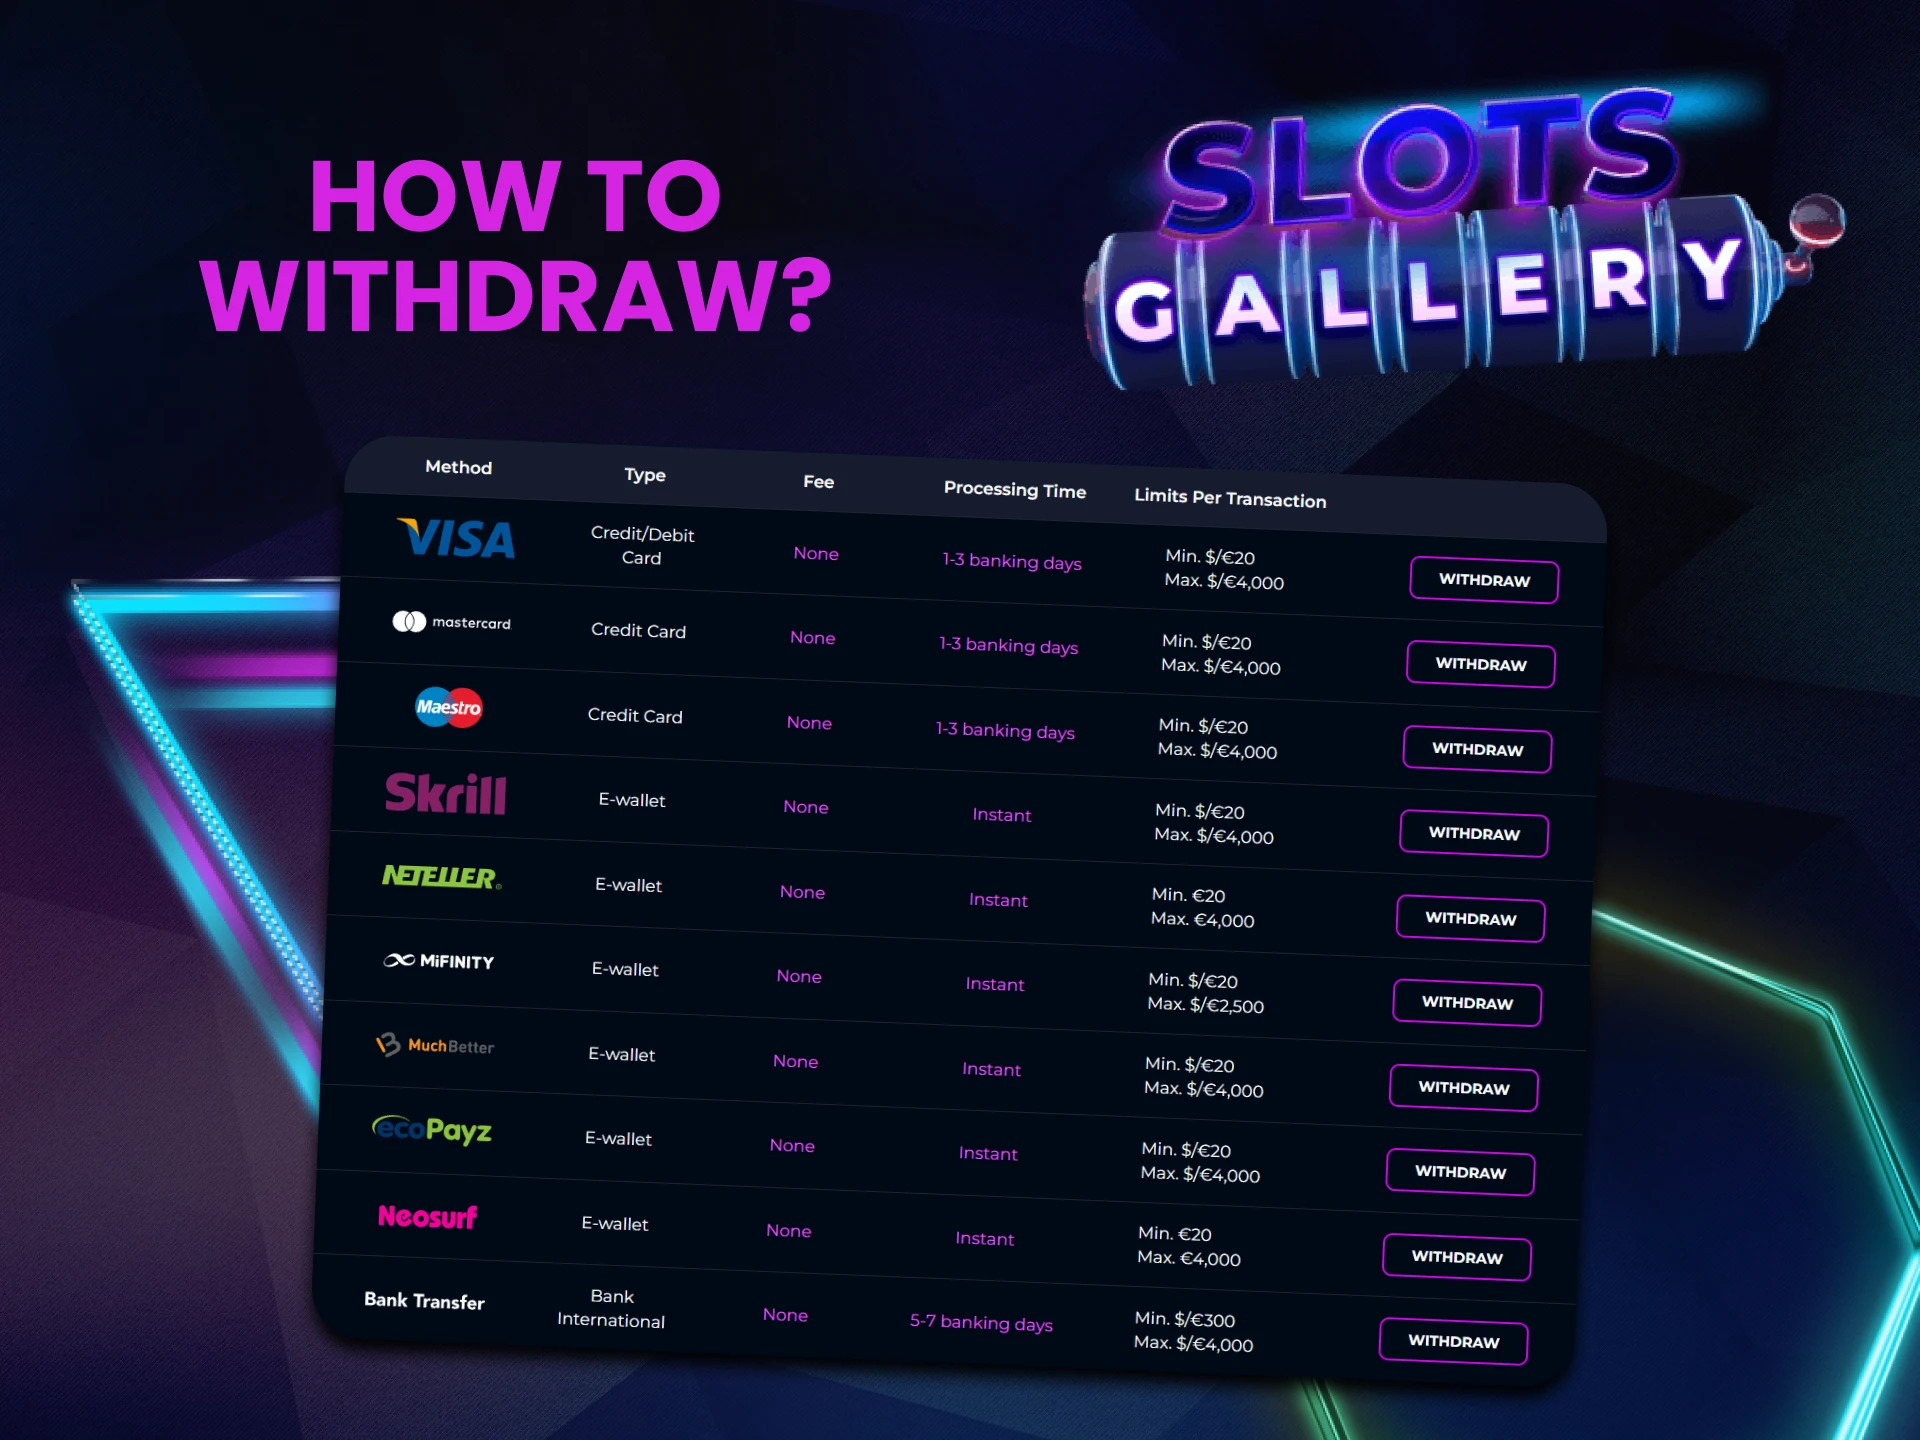 We will tell you how to withdraw funds to Slots Gallery.